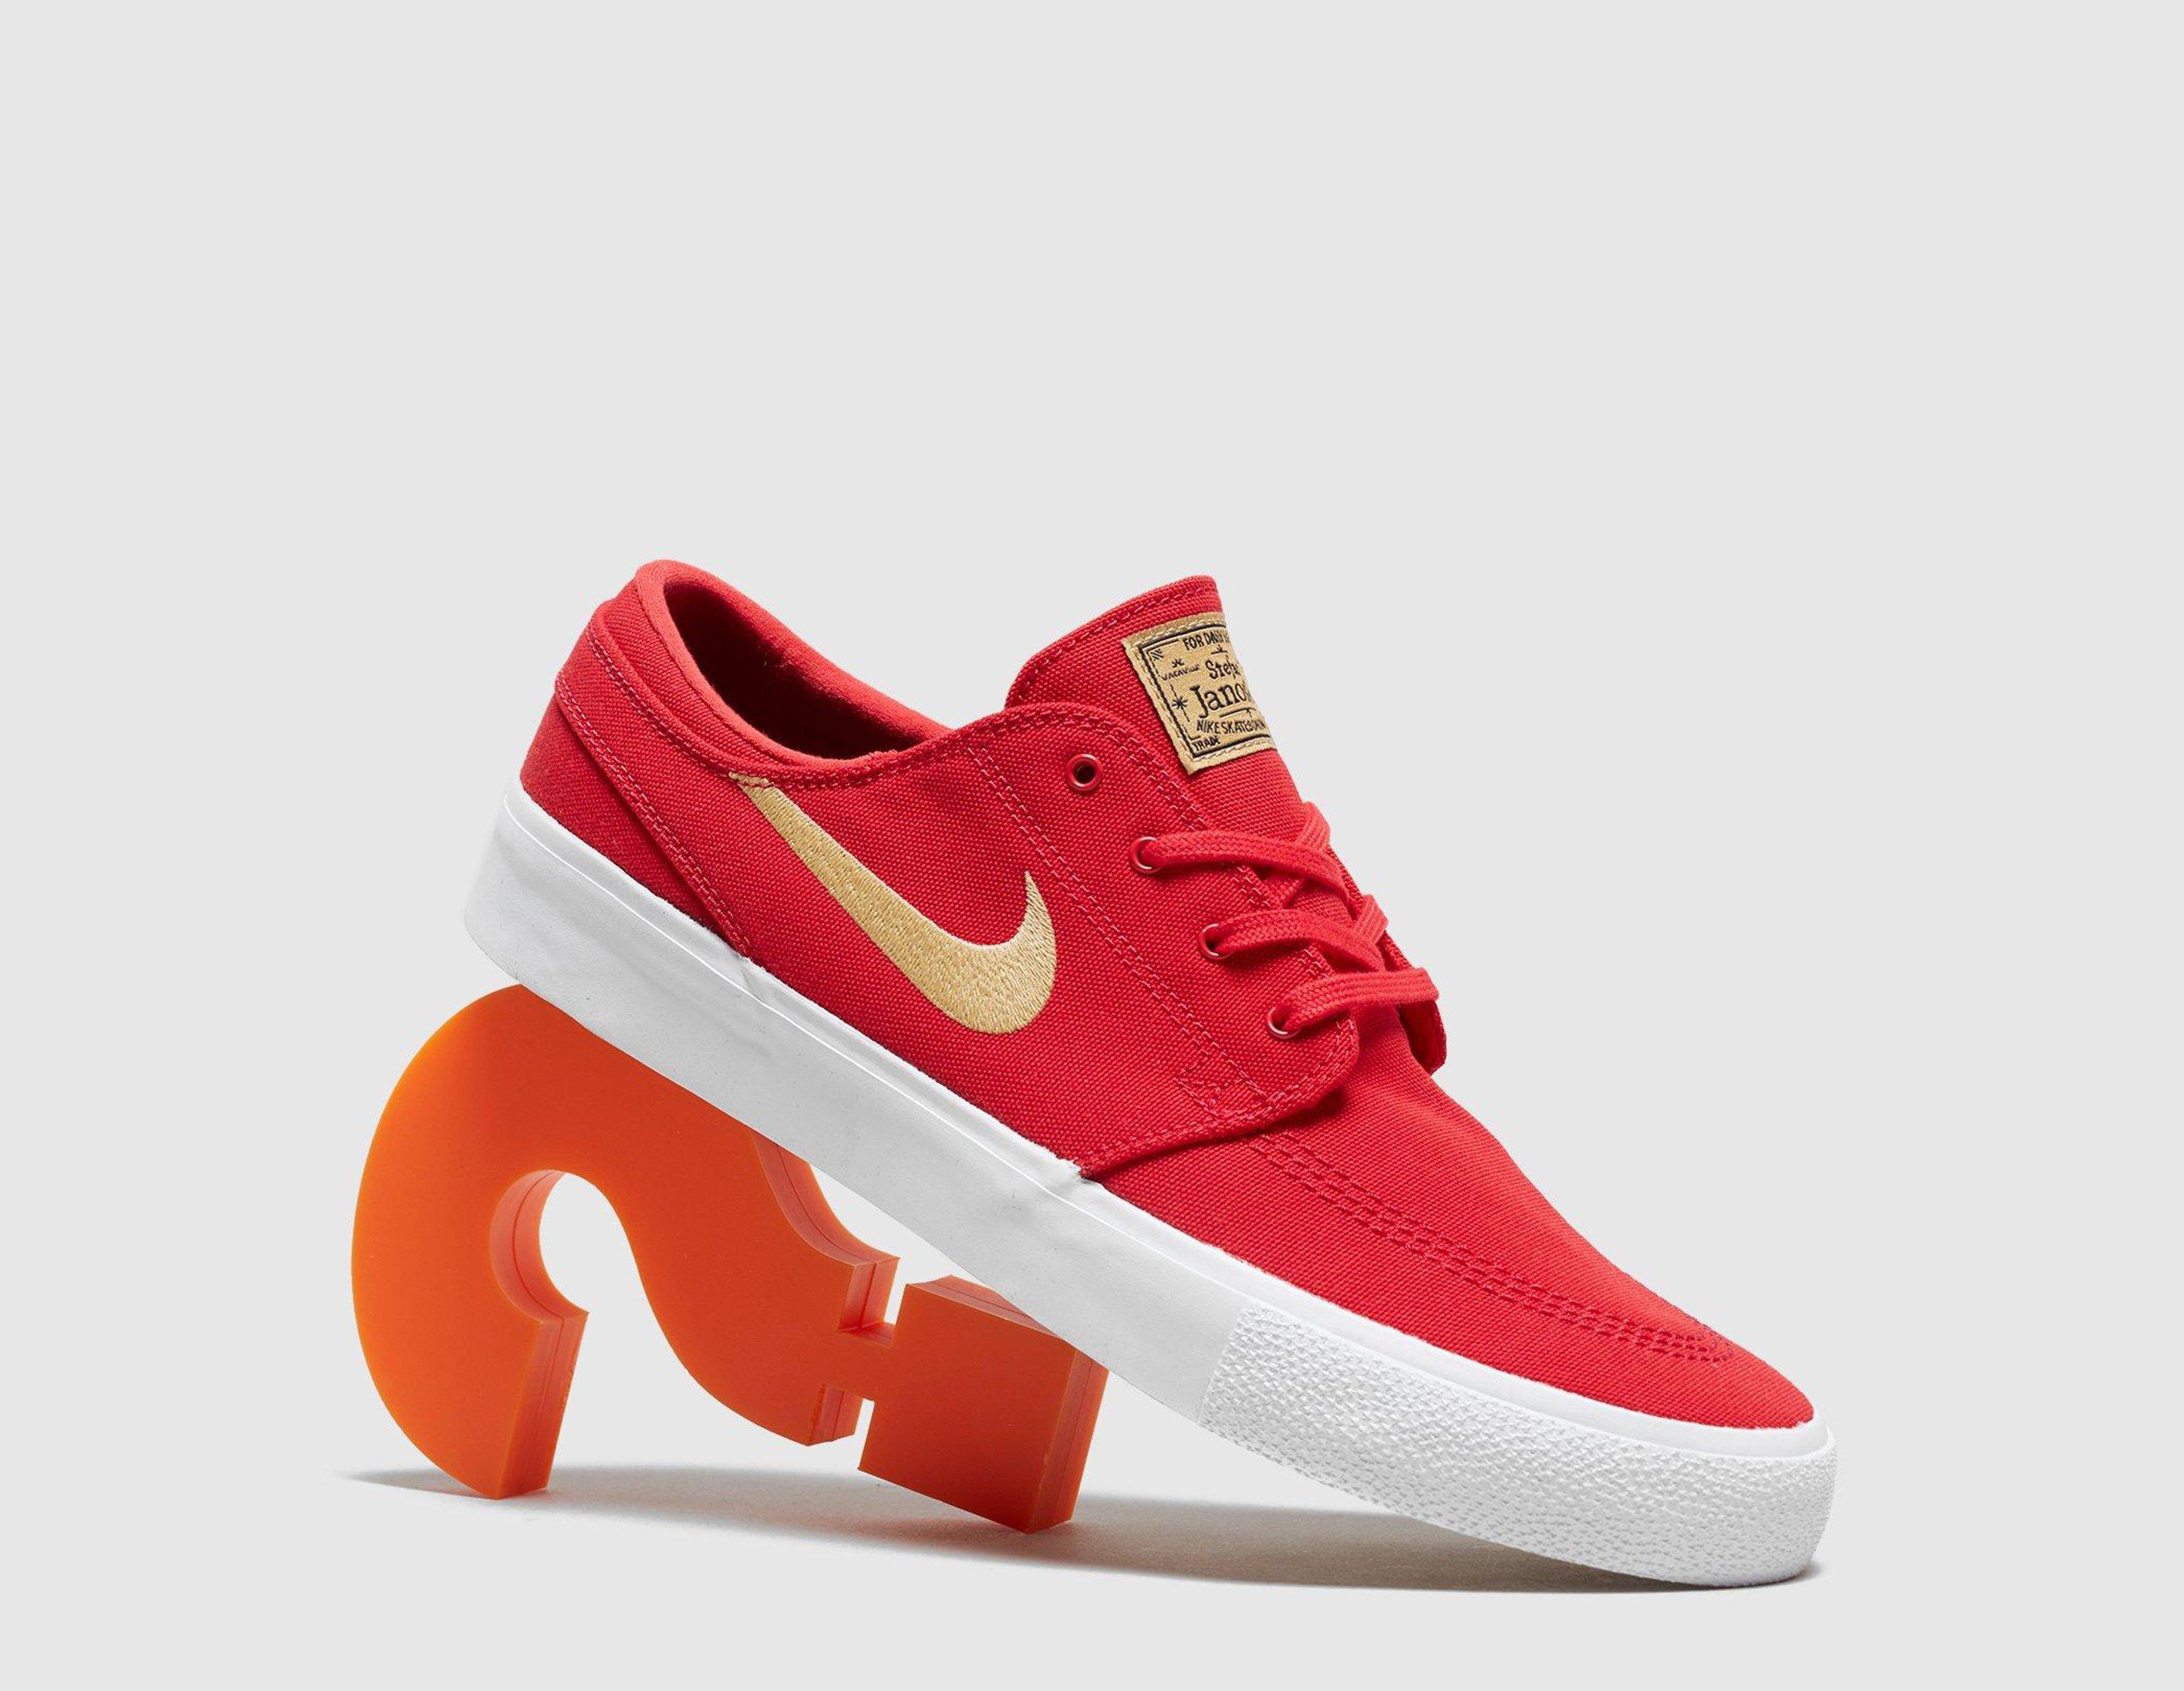 nike sb canvas red